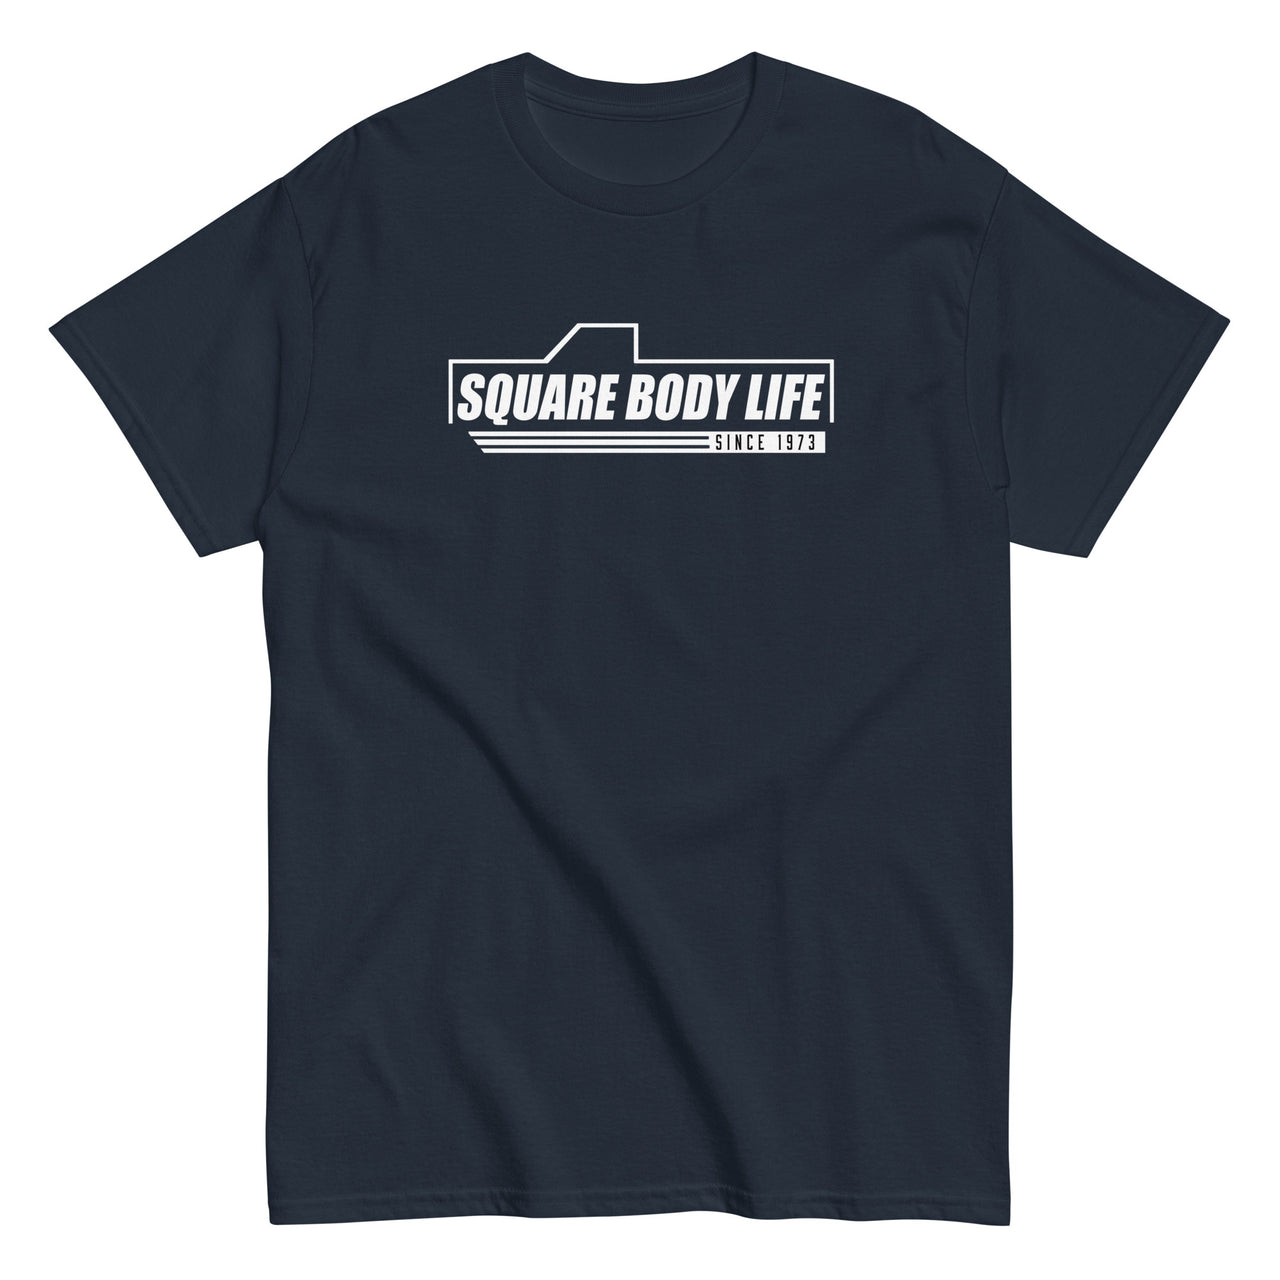 Square Body Life Truck T-Shirt in navy